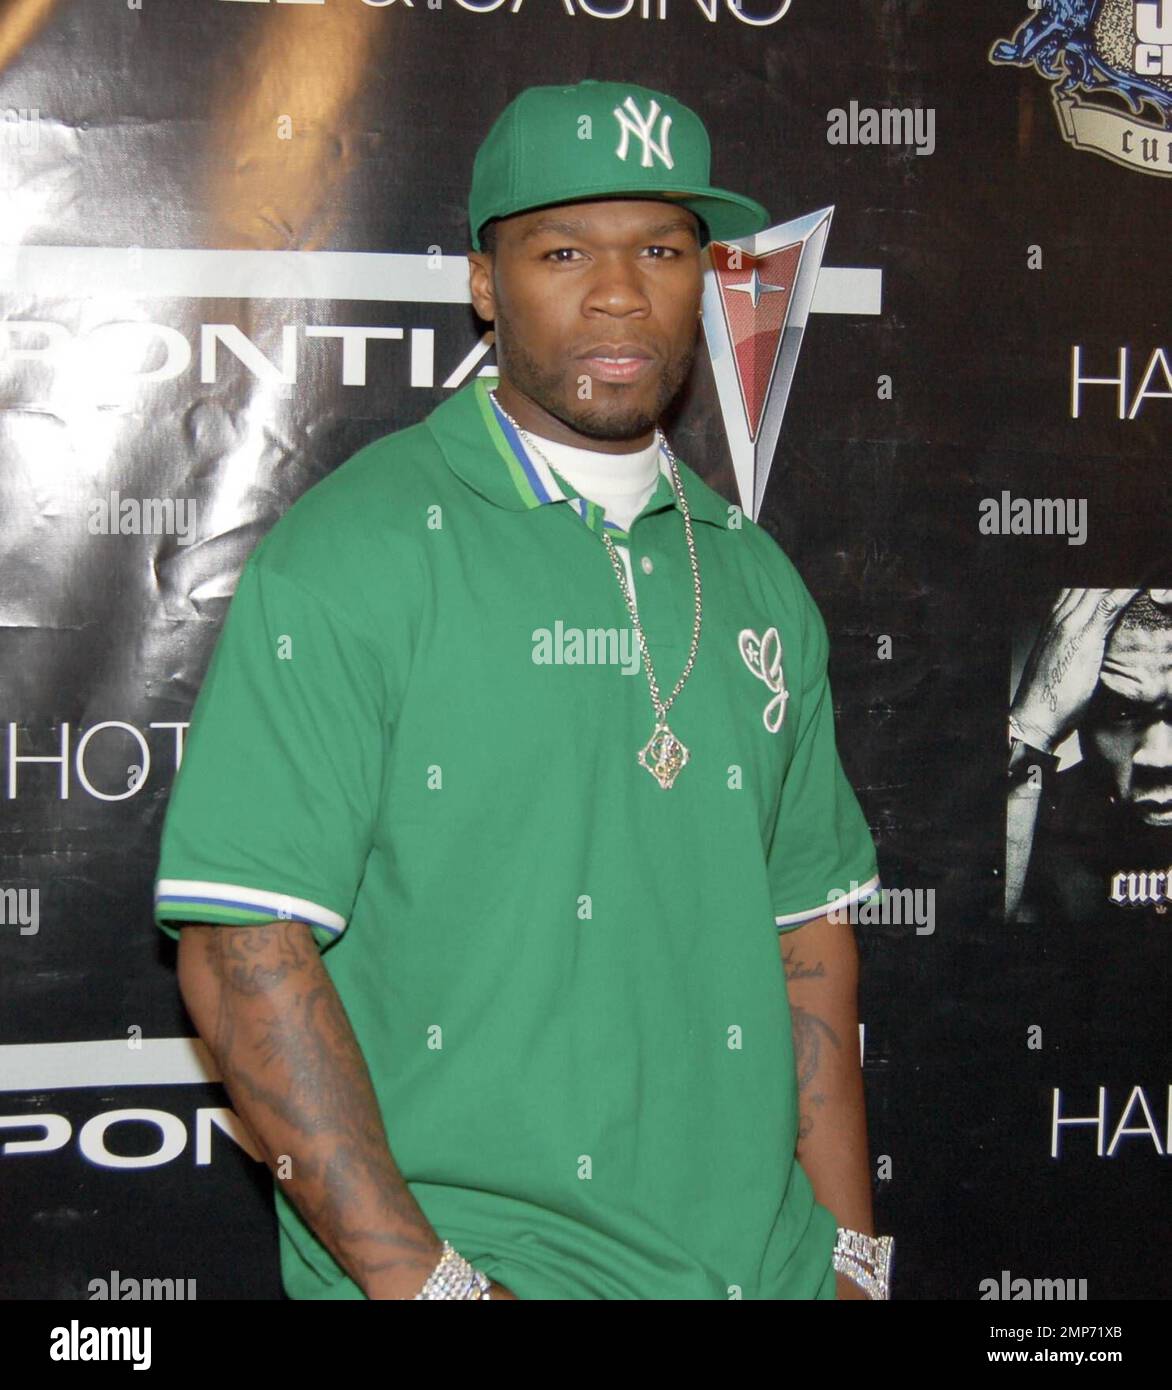 50 Cent walks the red carpet at Pontiac Presents 50 Cent performance ...